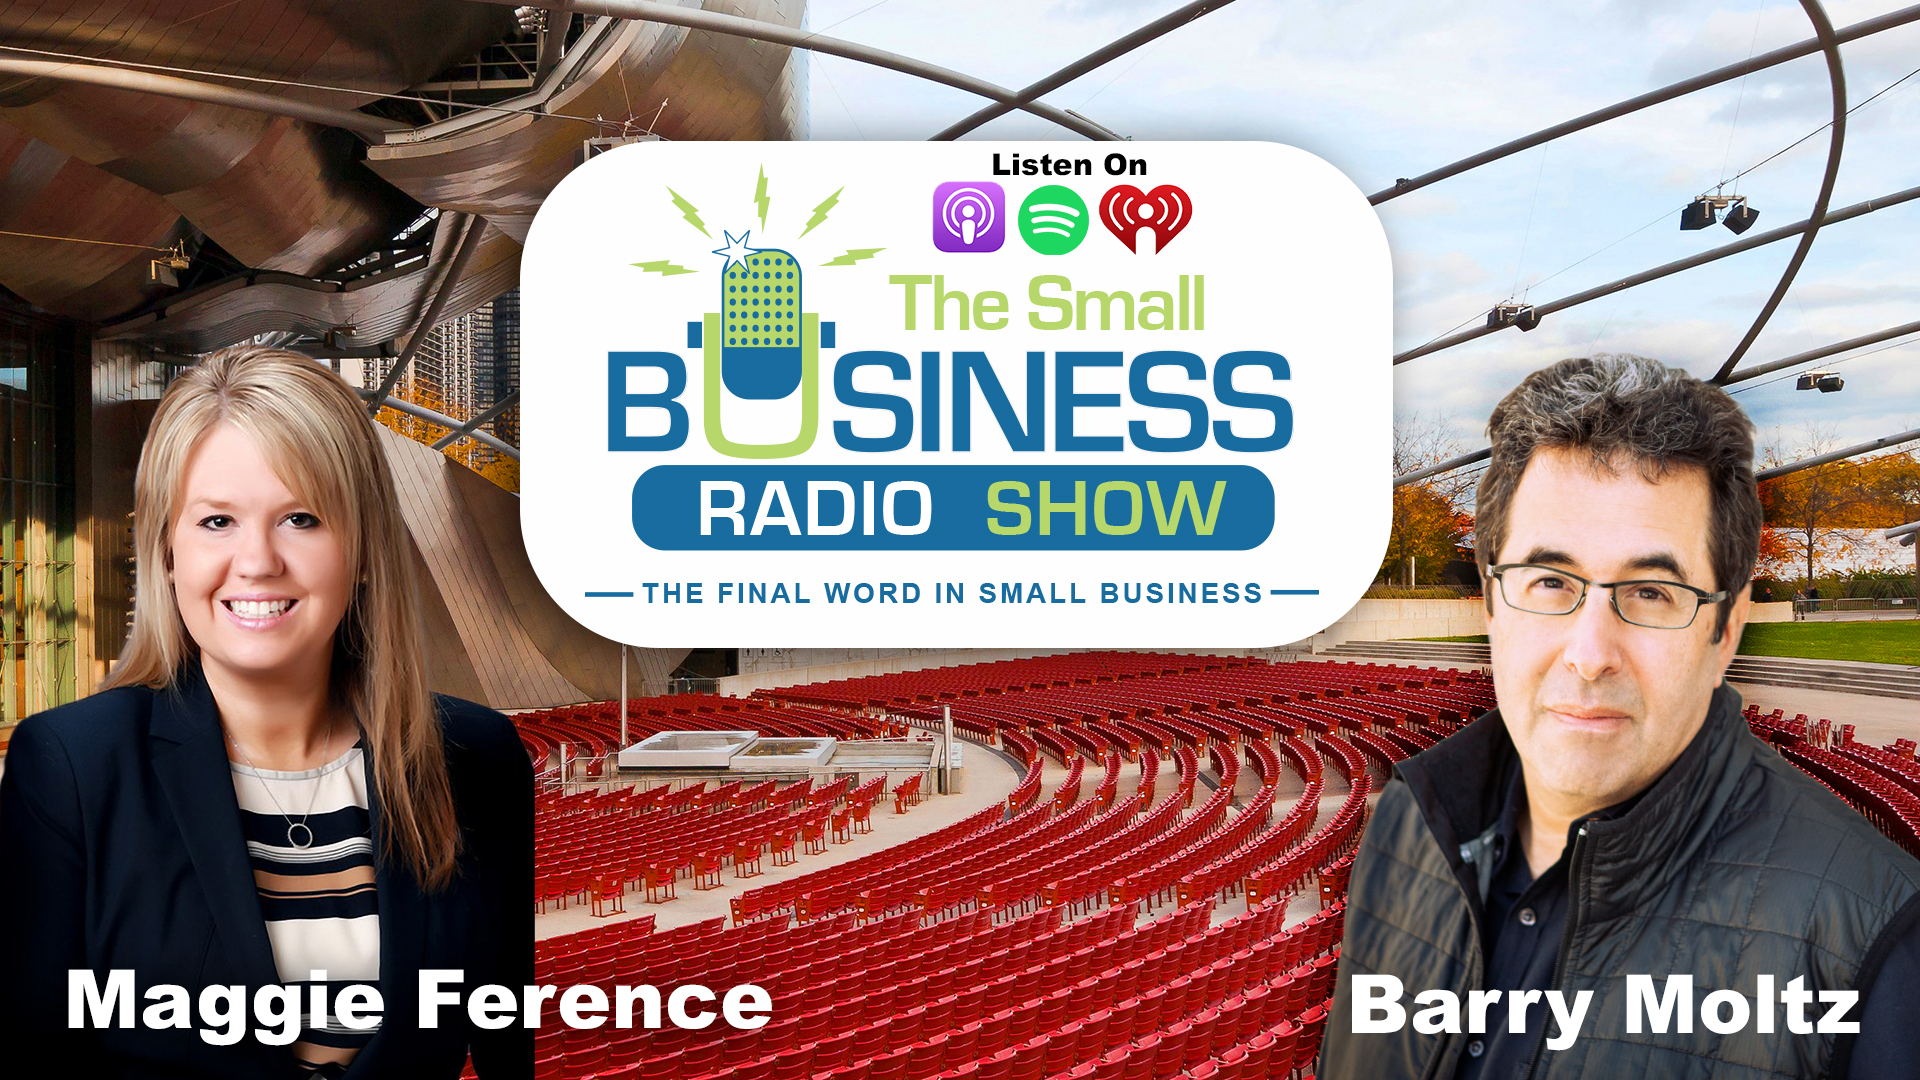 Margaret Ference on The Small Business Radio Show